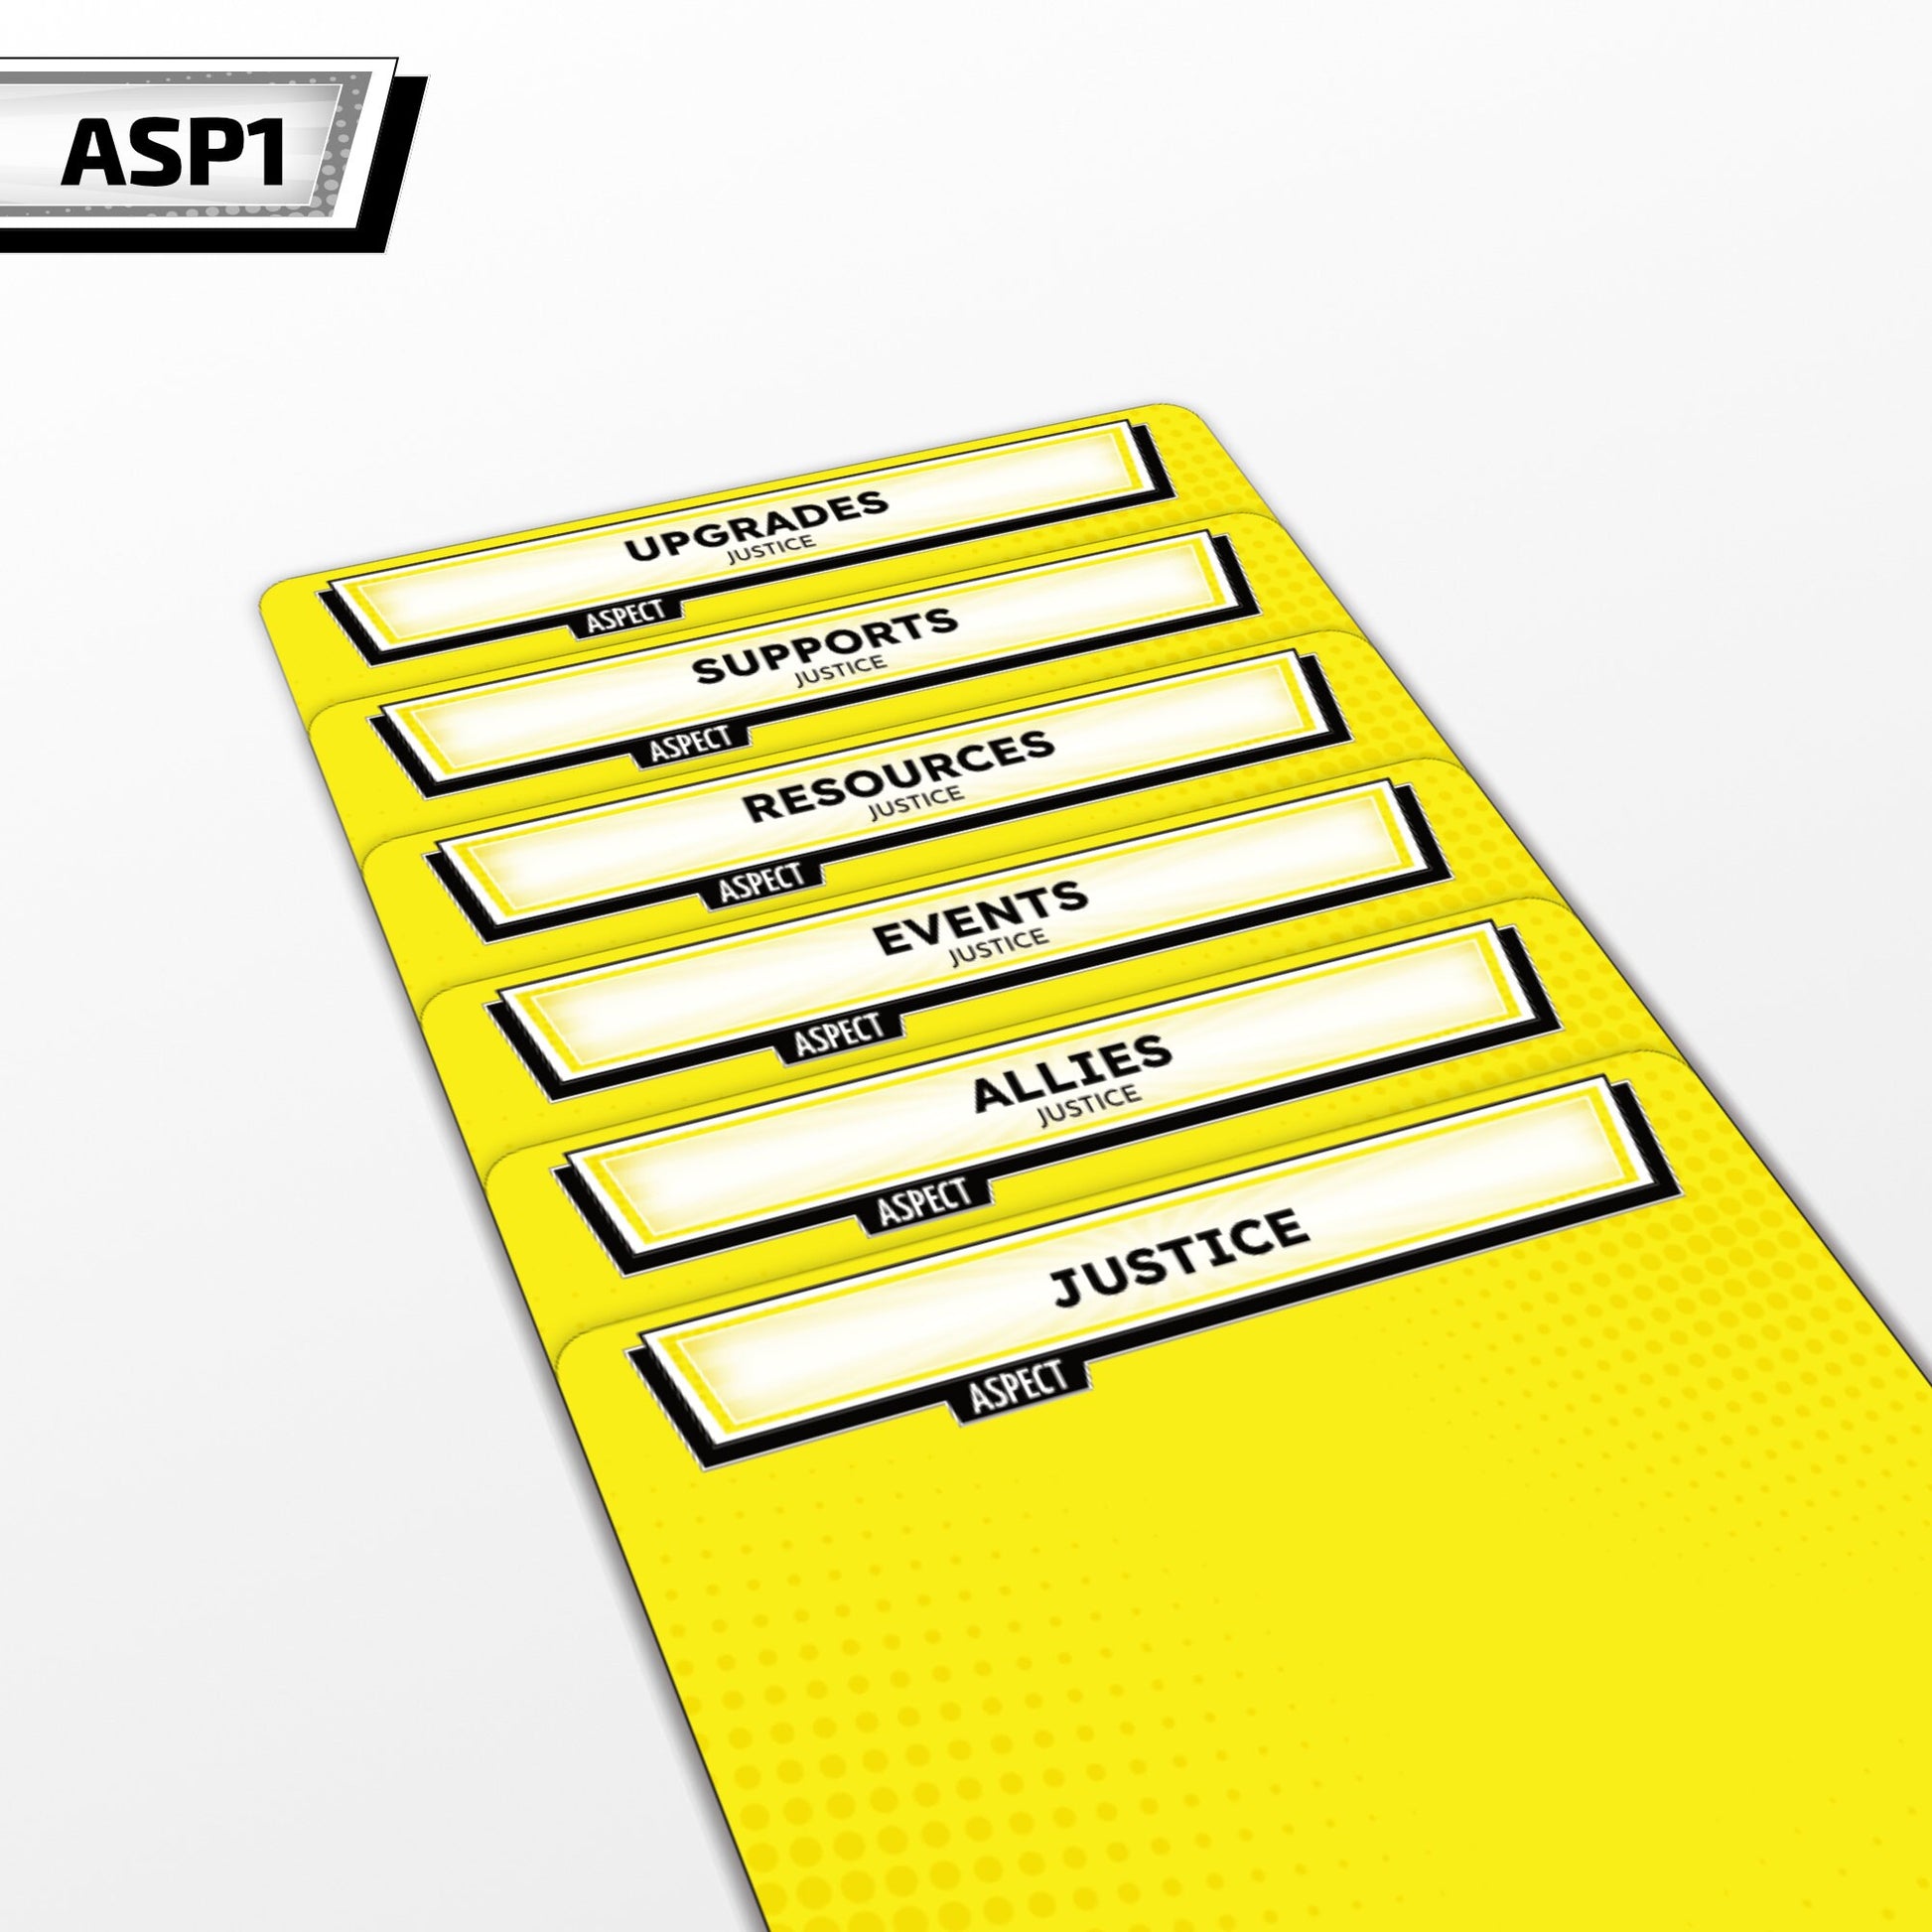 Aspect Cards Dividers Set for Marvel Champions - ASP1 - Arranged by Sub-Aspects (Justice Dividers Example)